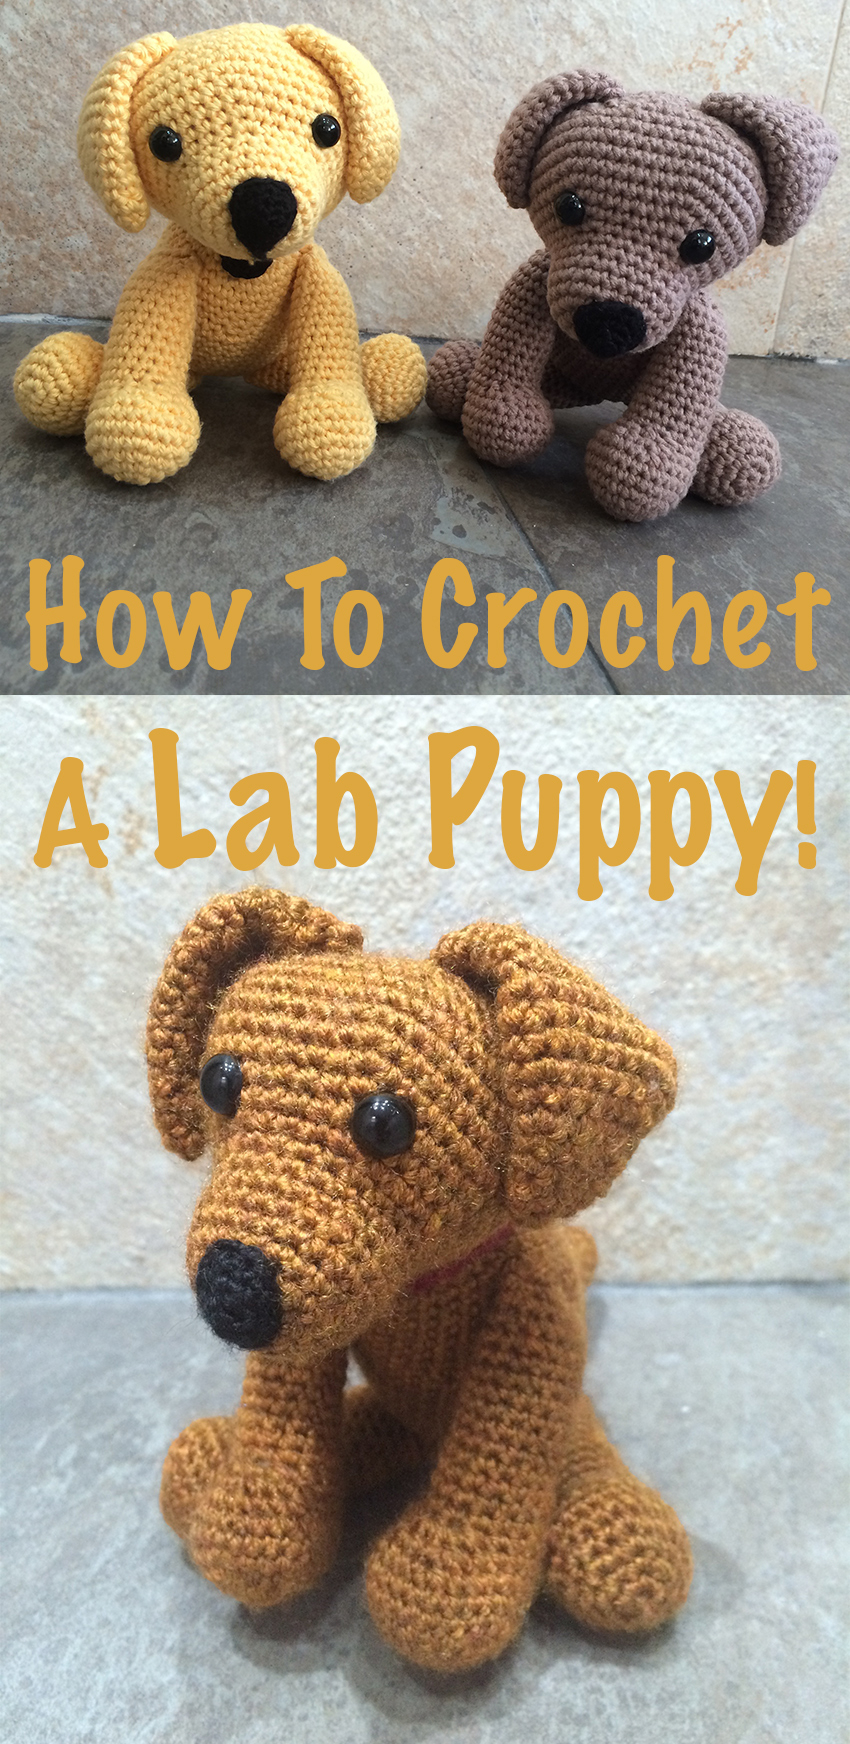 Crochet Dog Pattern Crochet Labrador How To Make Your Own Toy Dog The Labrador Site